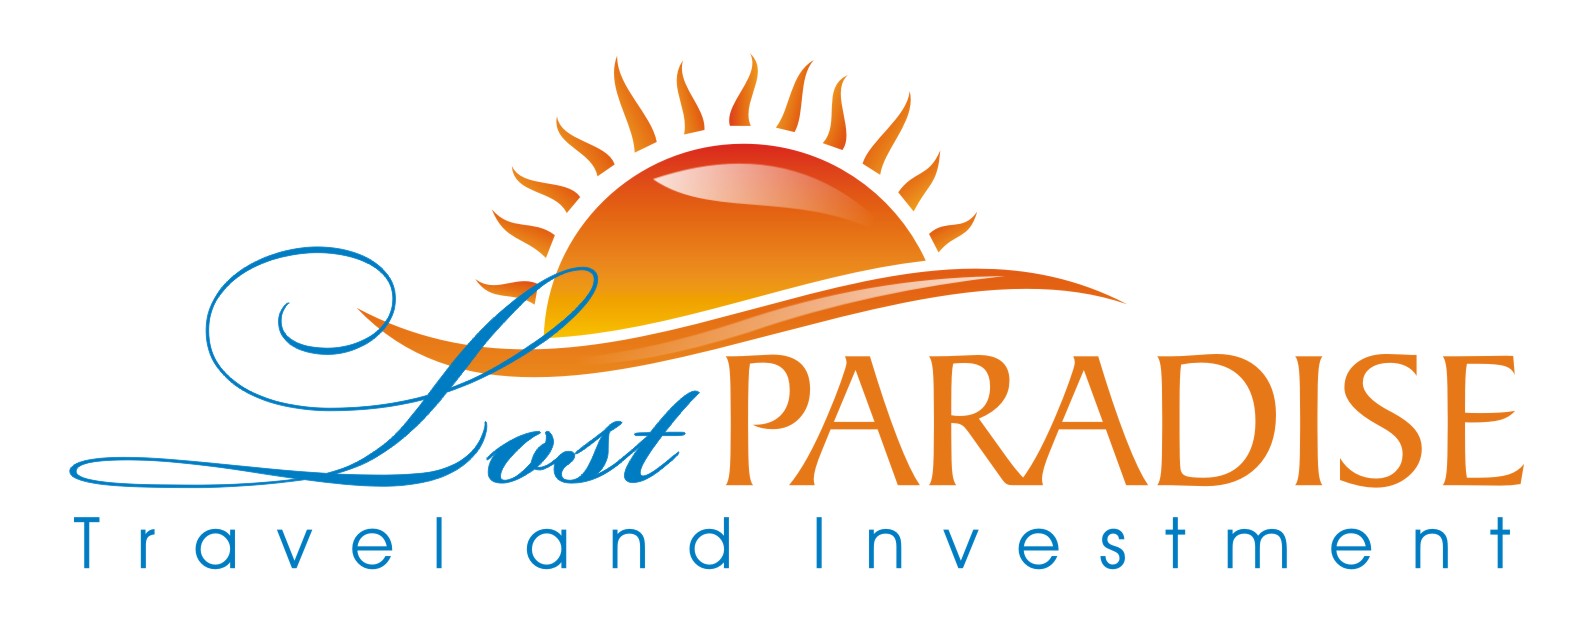 Lost Paradise Travel and Investment